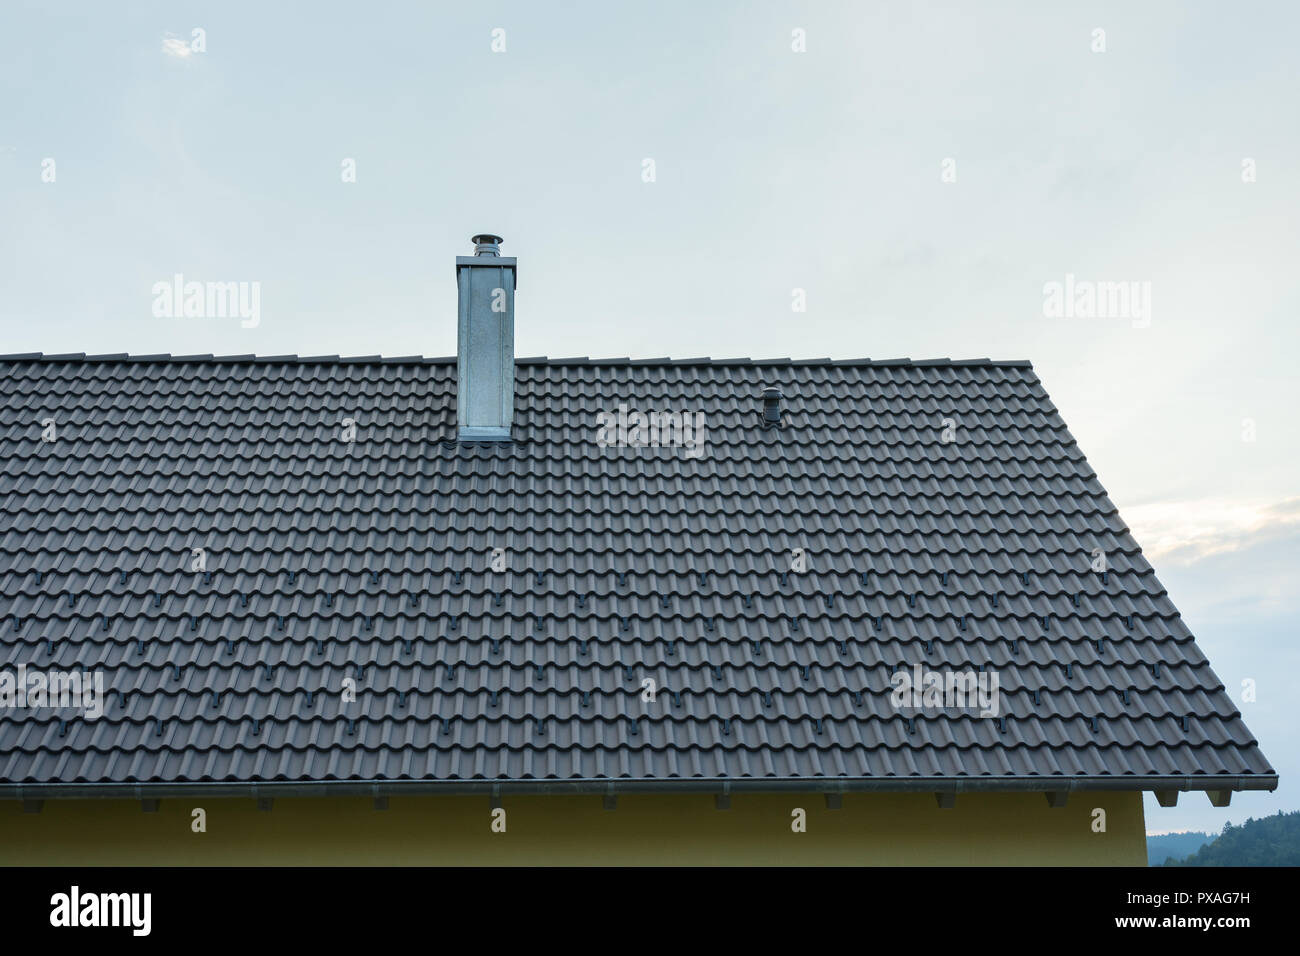 New building with dark roof tiles and chimney Stock Photo